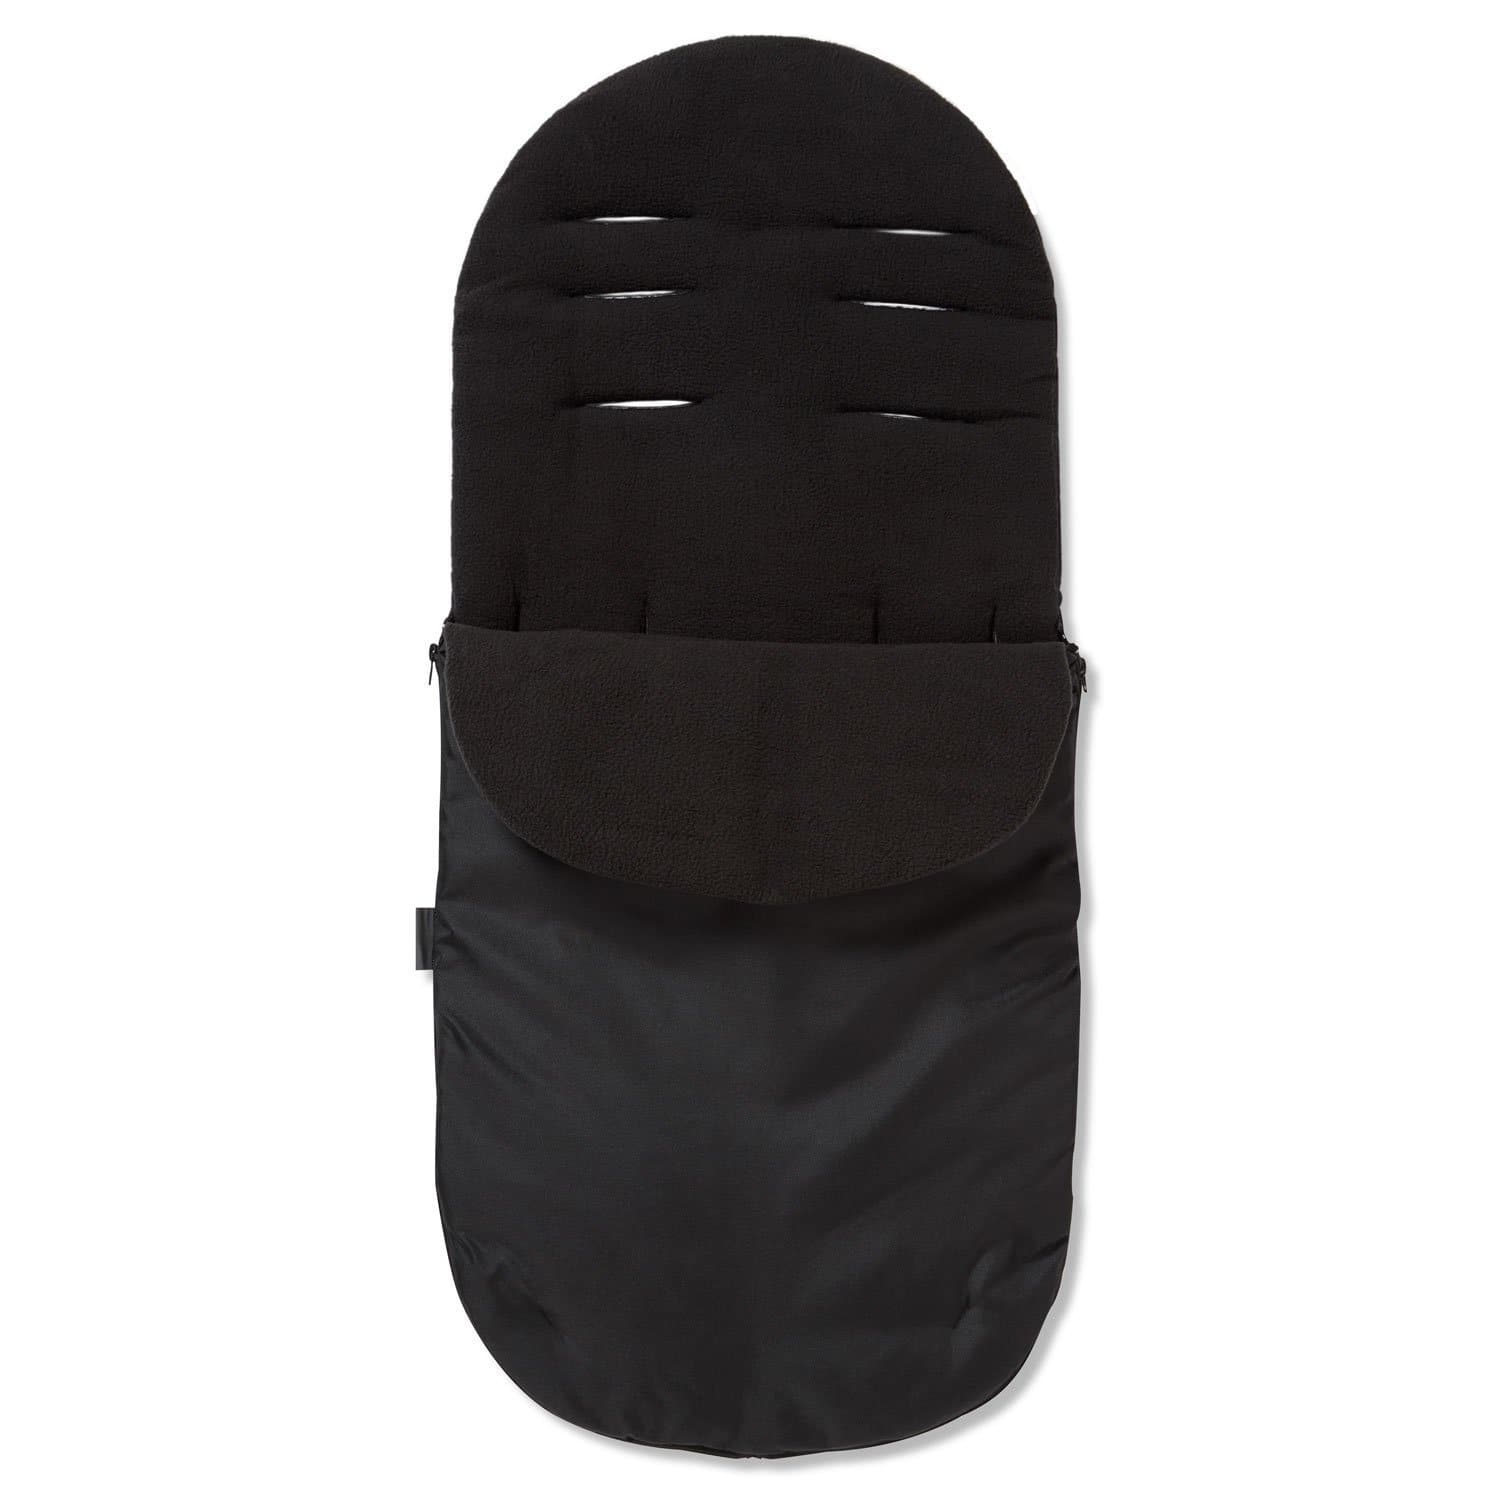 Footmuff / Cosy Toes Compatible with My Babiie - Black / Fits All Models | For Your Little One